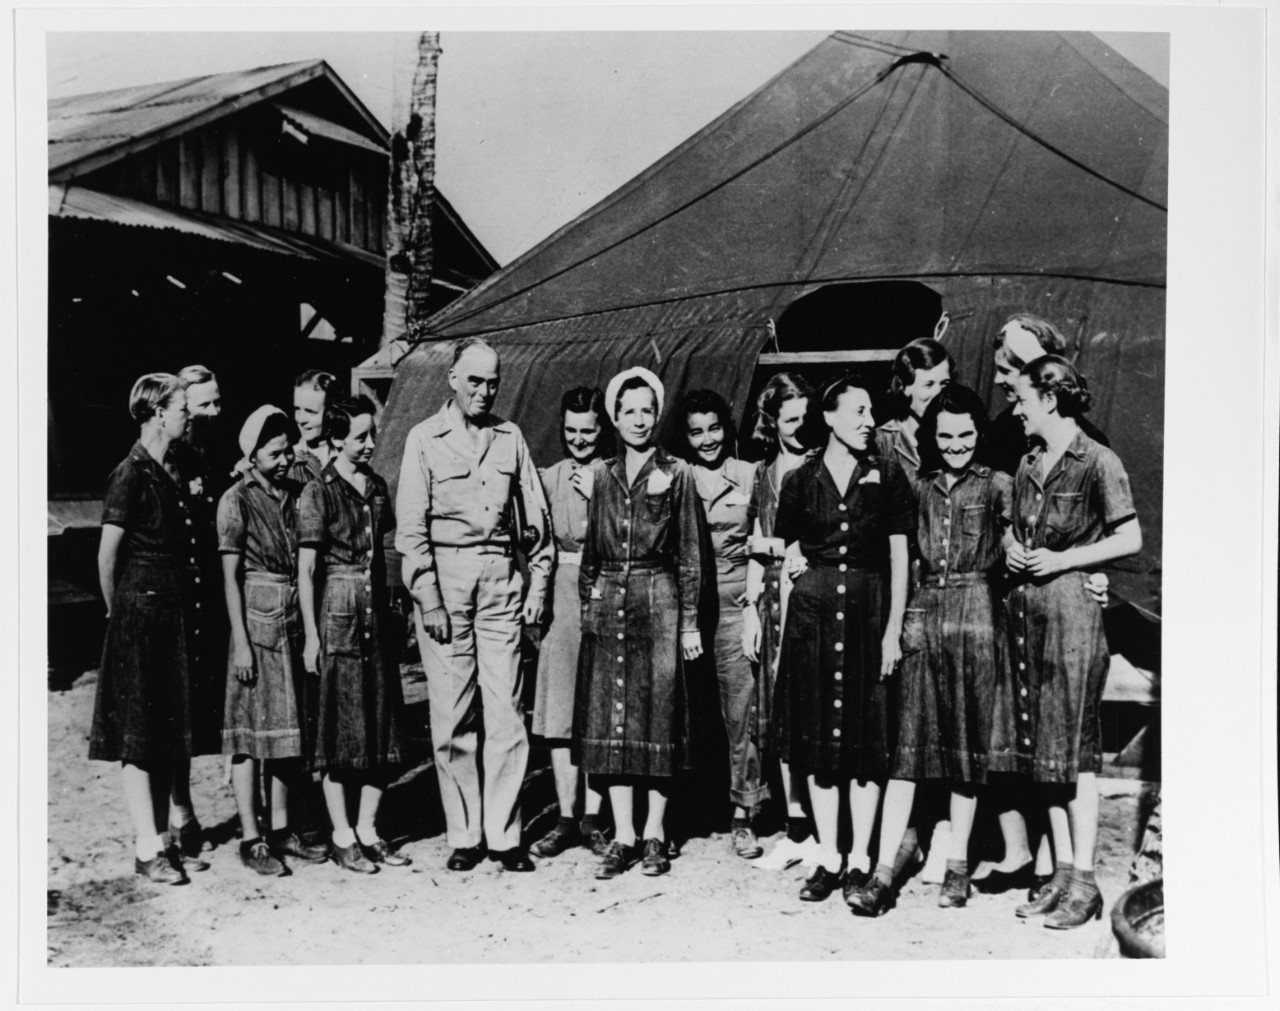 A male flag officer stands next to a group of smiling women in worn-looking dresses outside of a tent